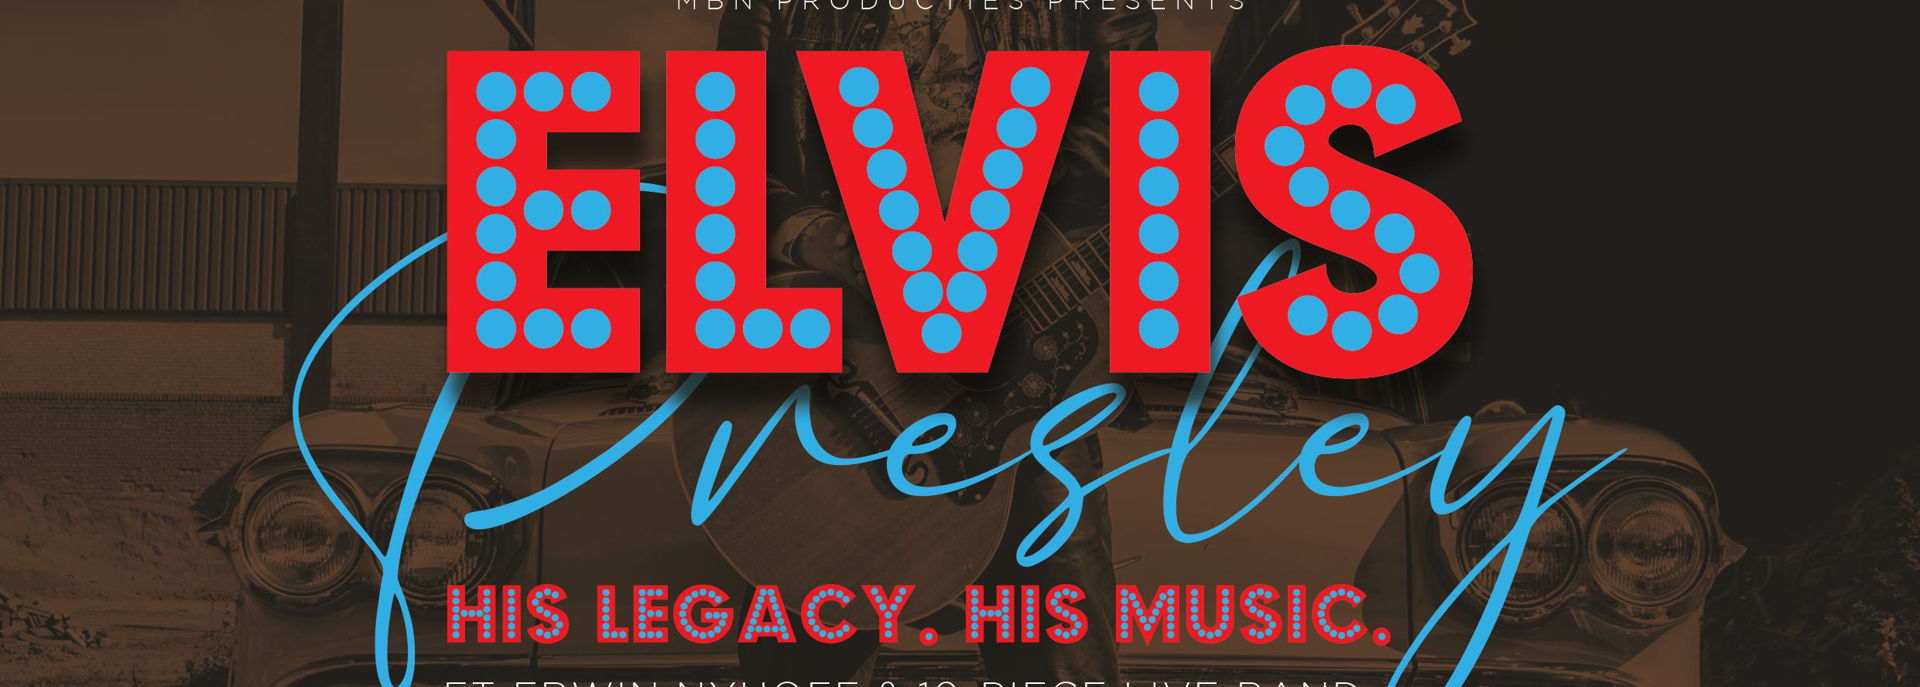 Elvis the music - The King Erwin Nyhoff & liveband - 2023 in De Tamboer